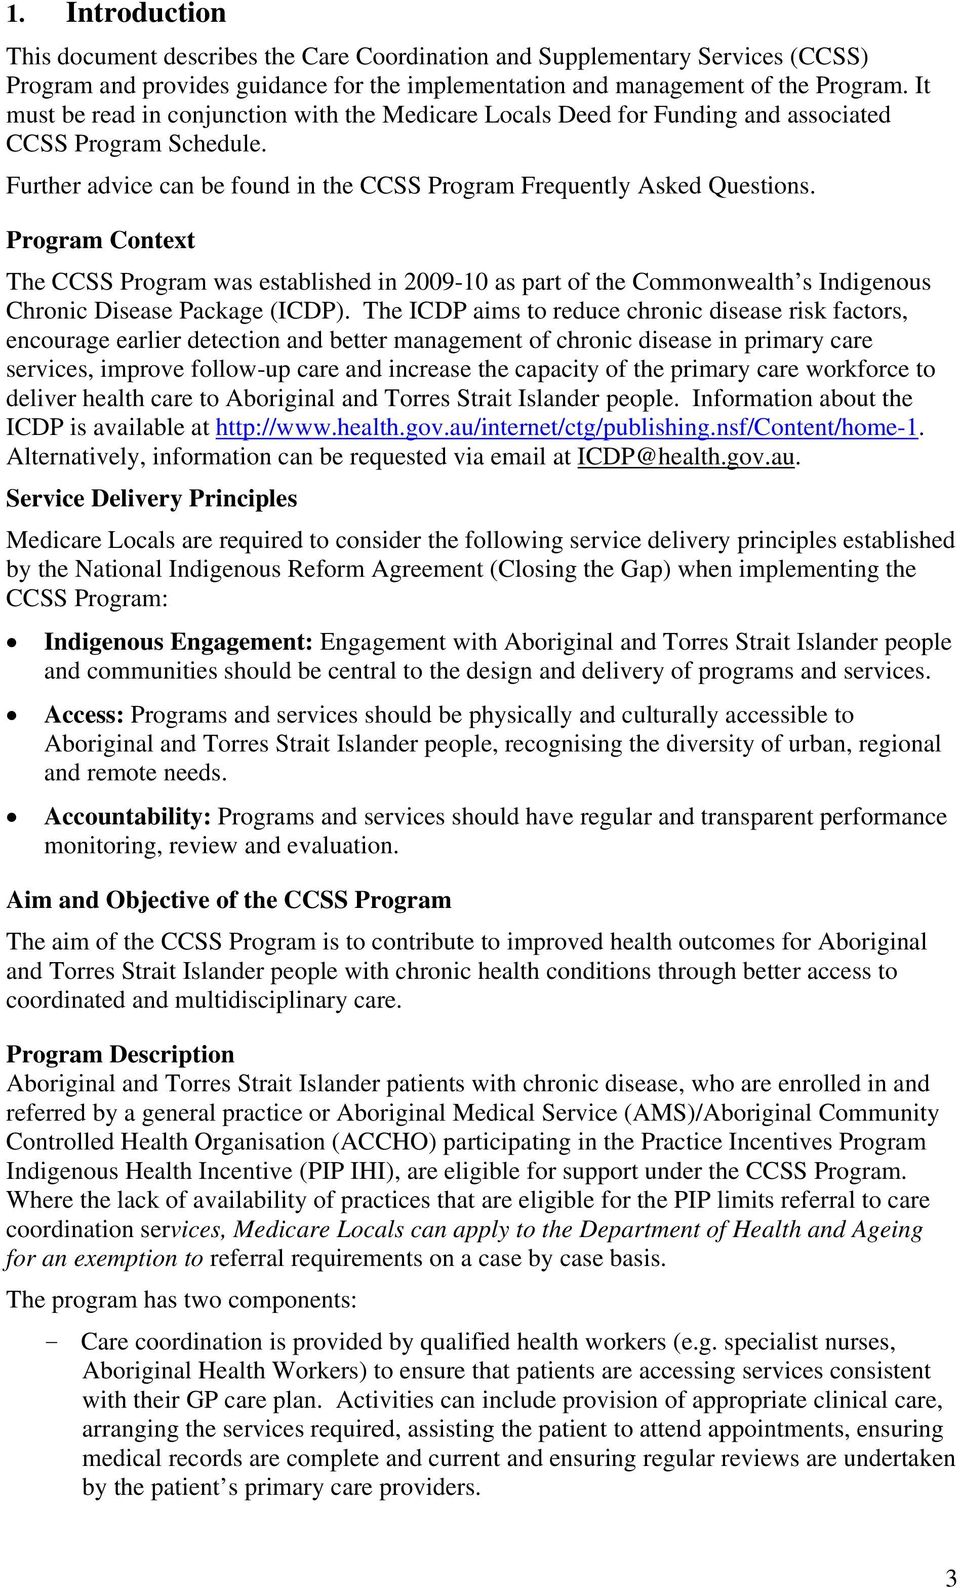 Program Context The CCSS Program was established in 2009-10 as part of the Commonwealth s Indigenous Chronic Disease Package (ICDP).